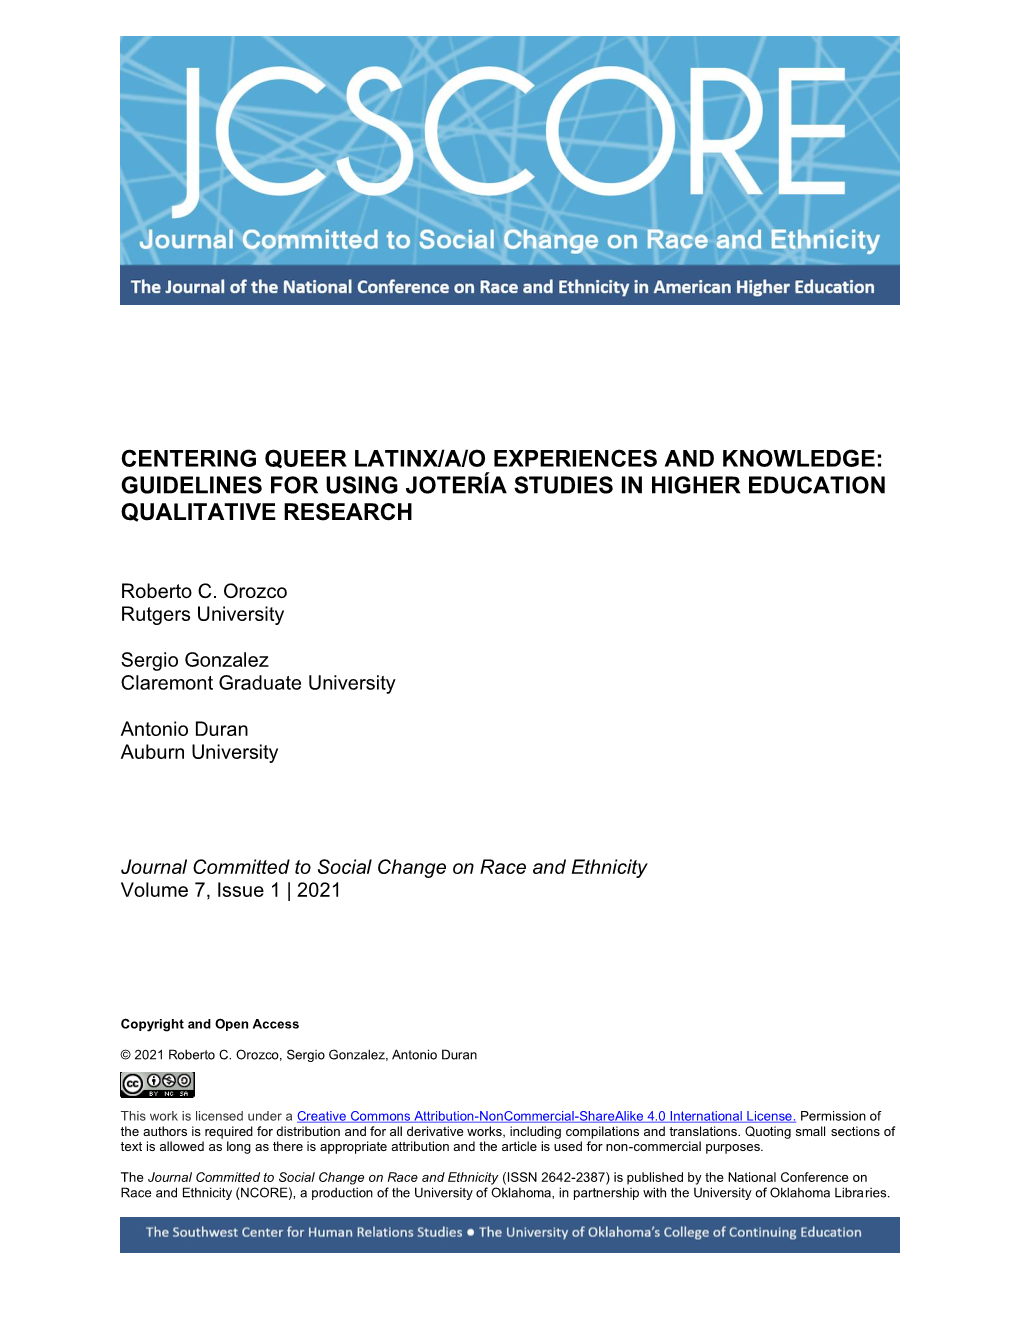 Centering Queer Latinx/A/O Experiences and Knowledge: Guidelines for Using Jotería Studies in Higher Education Qualitative Research